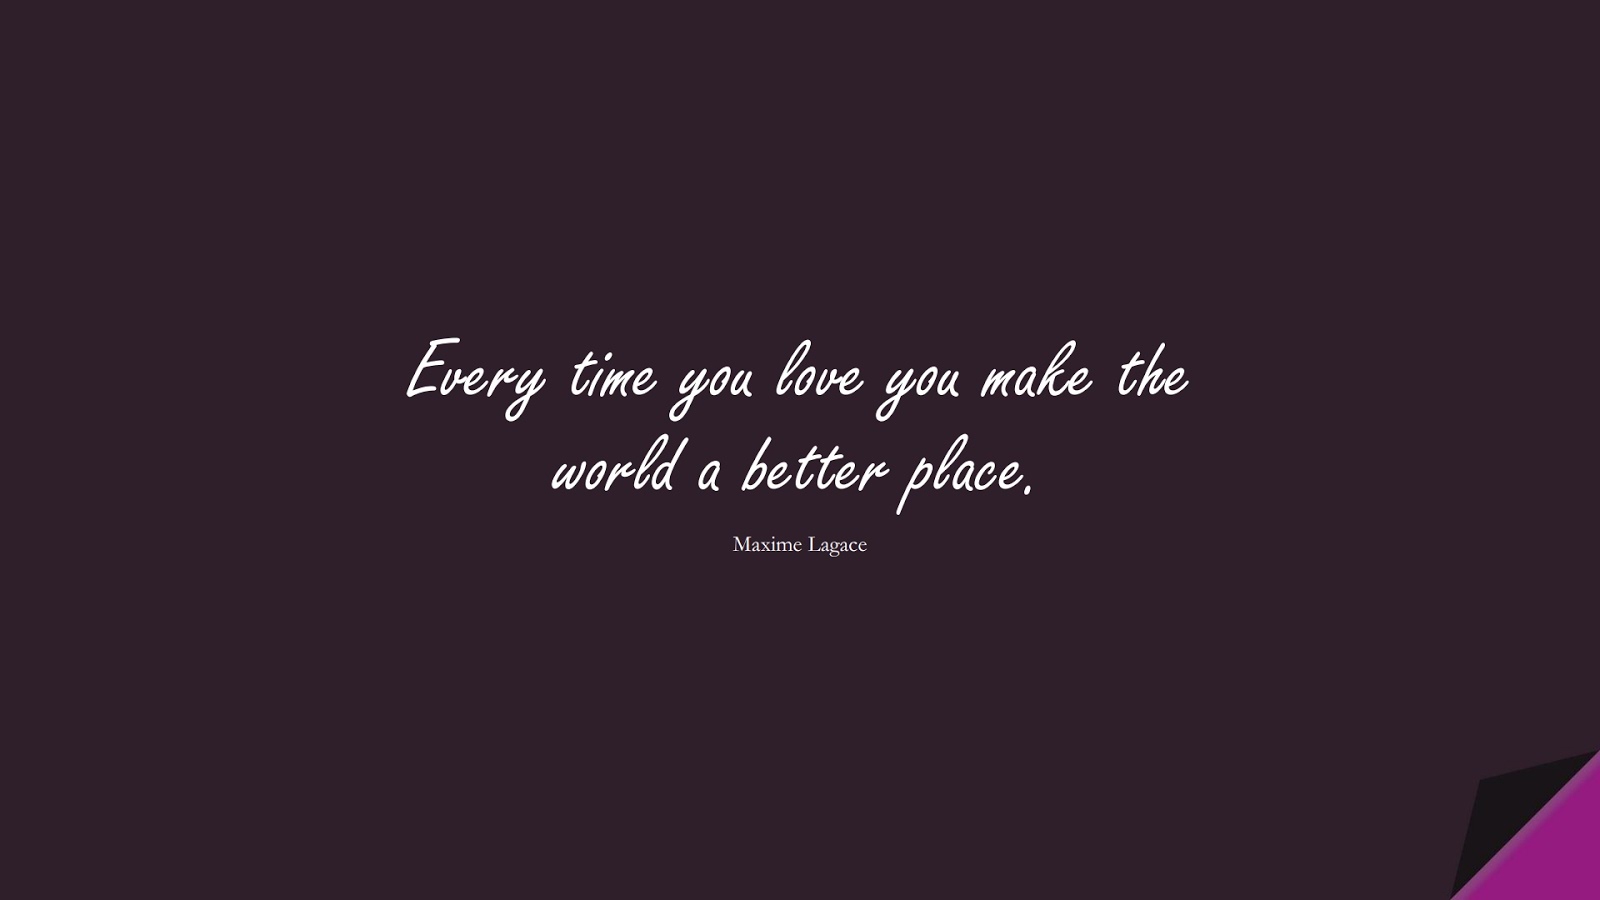 Every time you love you make the world a better place. (Maxime Lagace);  #LoveQuotes